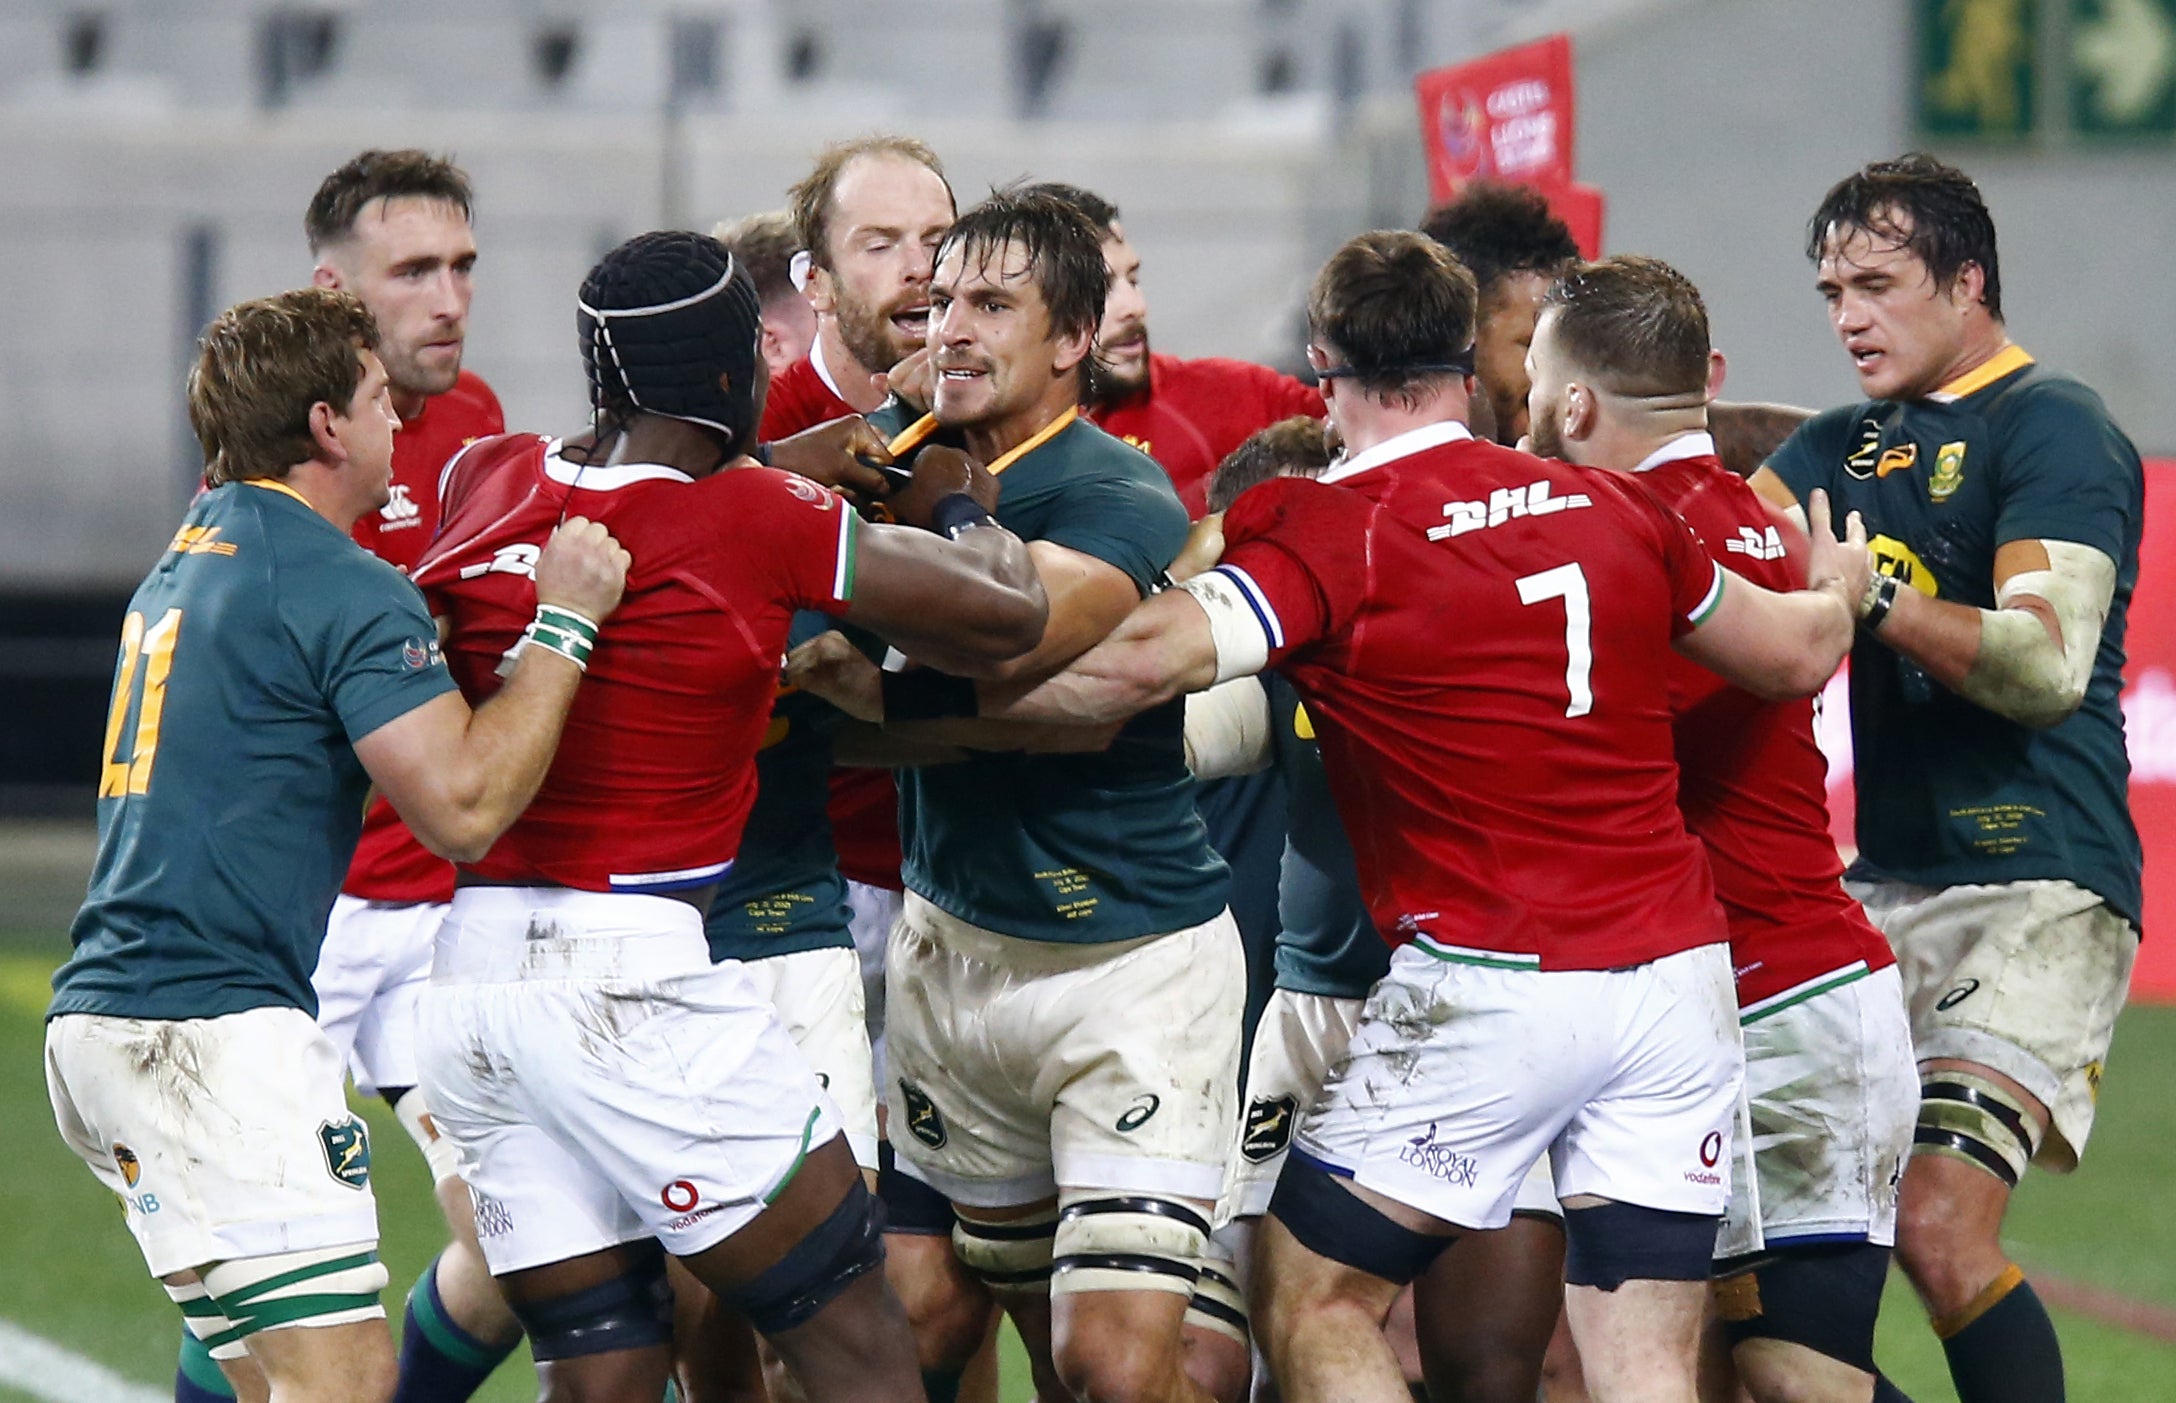 South Africa beat the British and Irish Lions in a bruising 27-9 victory to set up a decider in the three-match series (Steve Haag/PA)